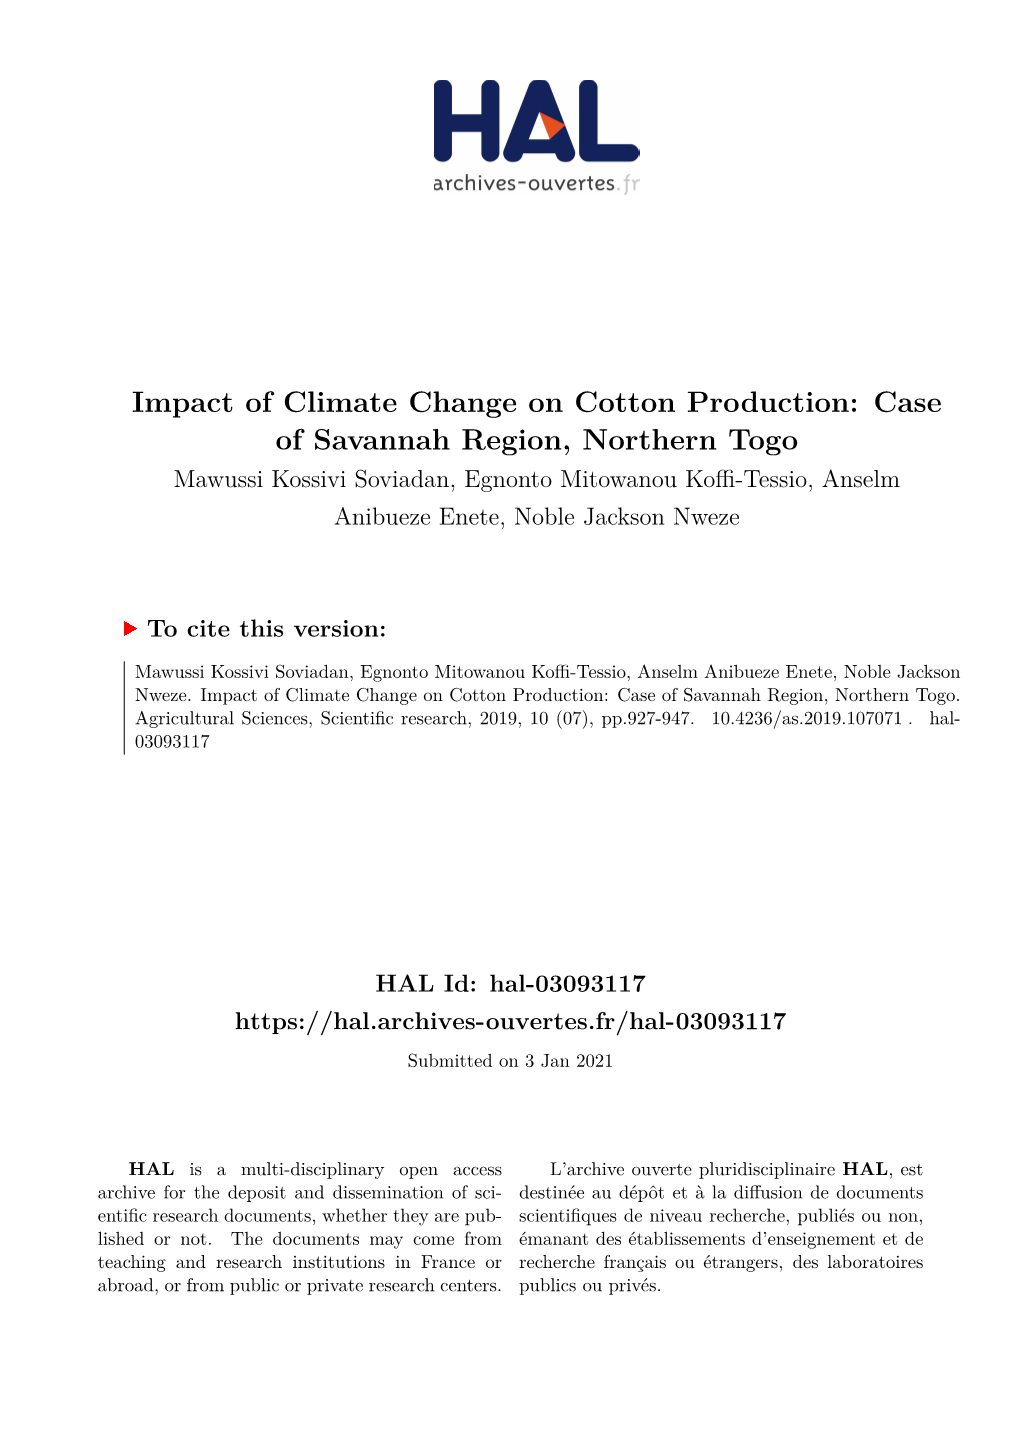 Impact of Climate Change on Cotton Production